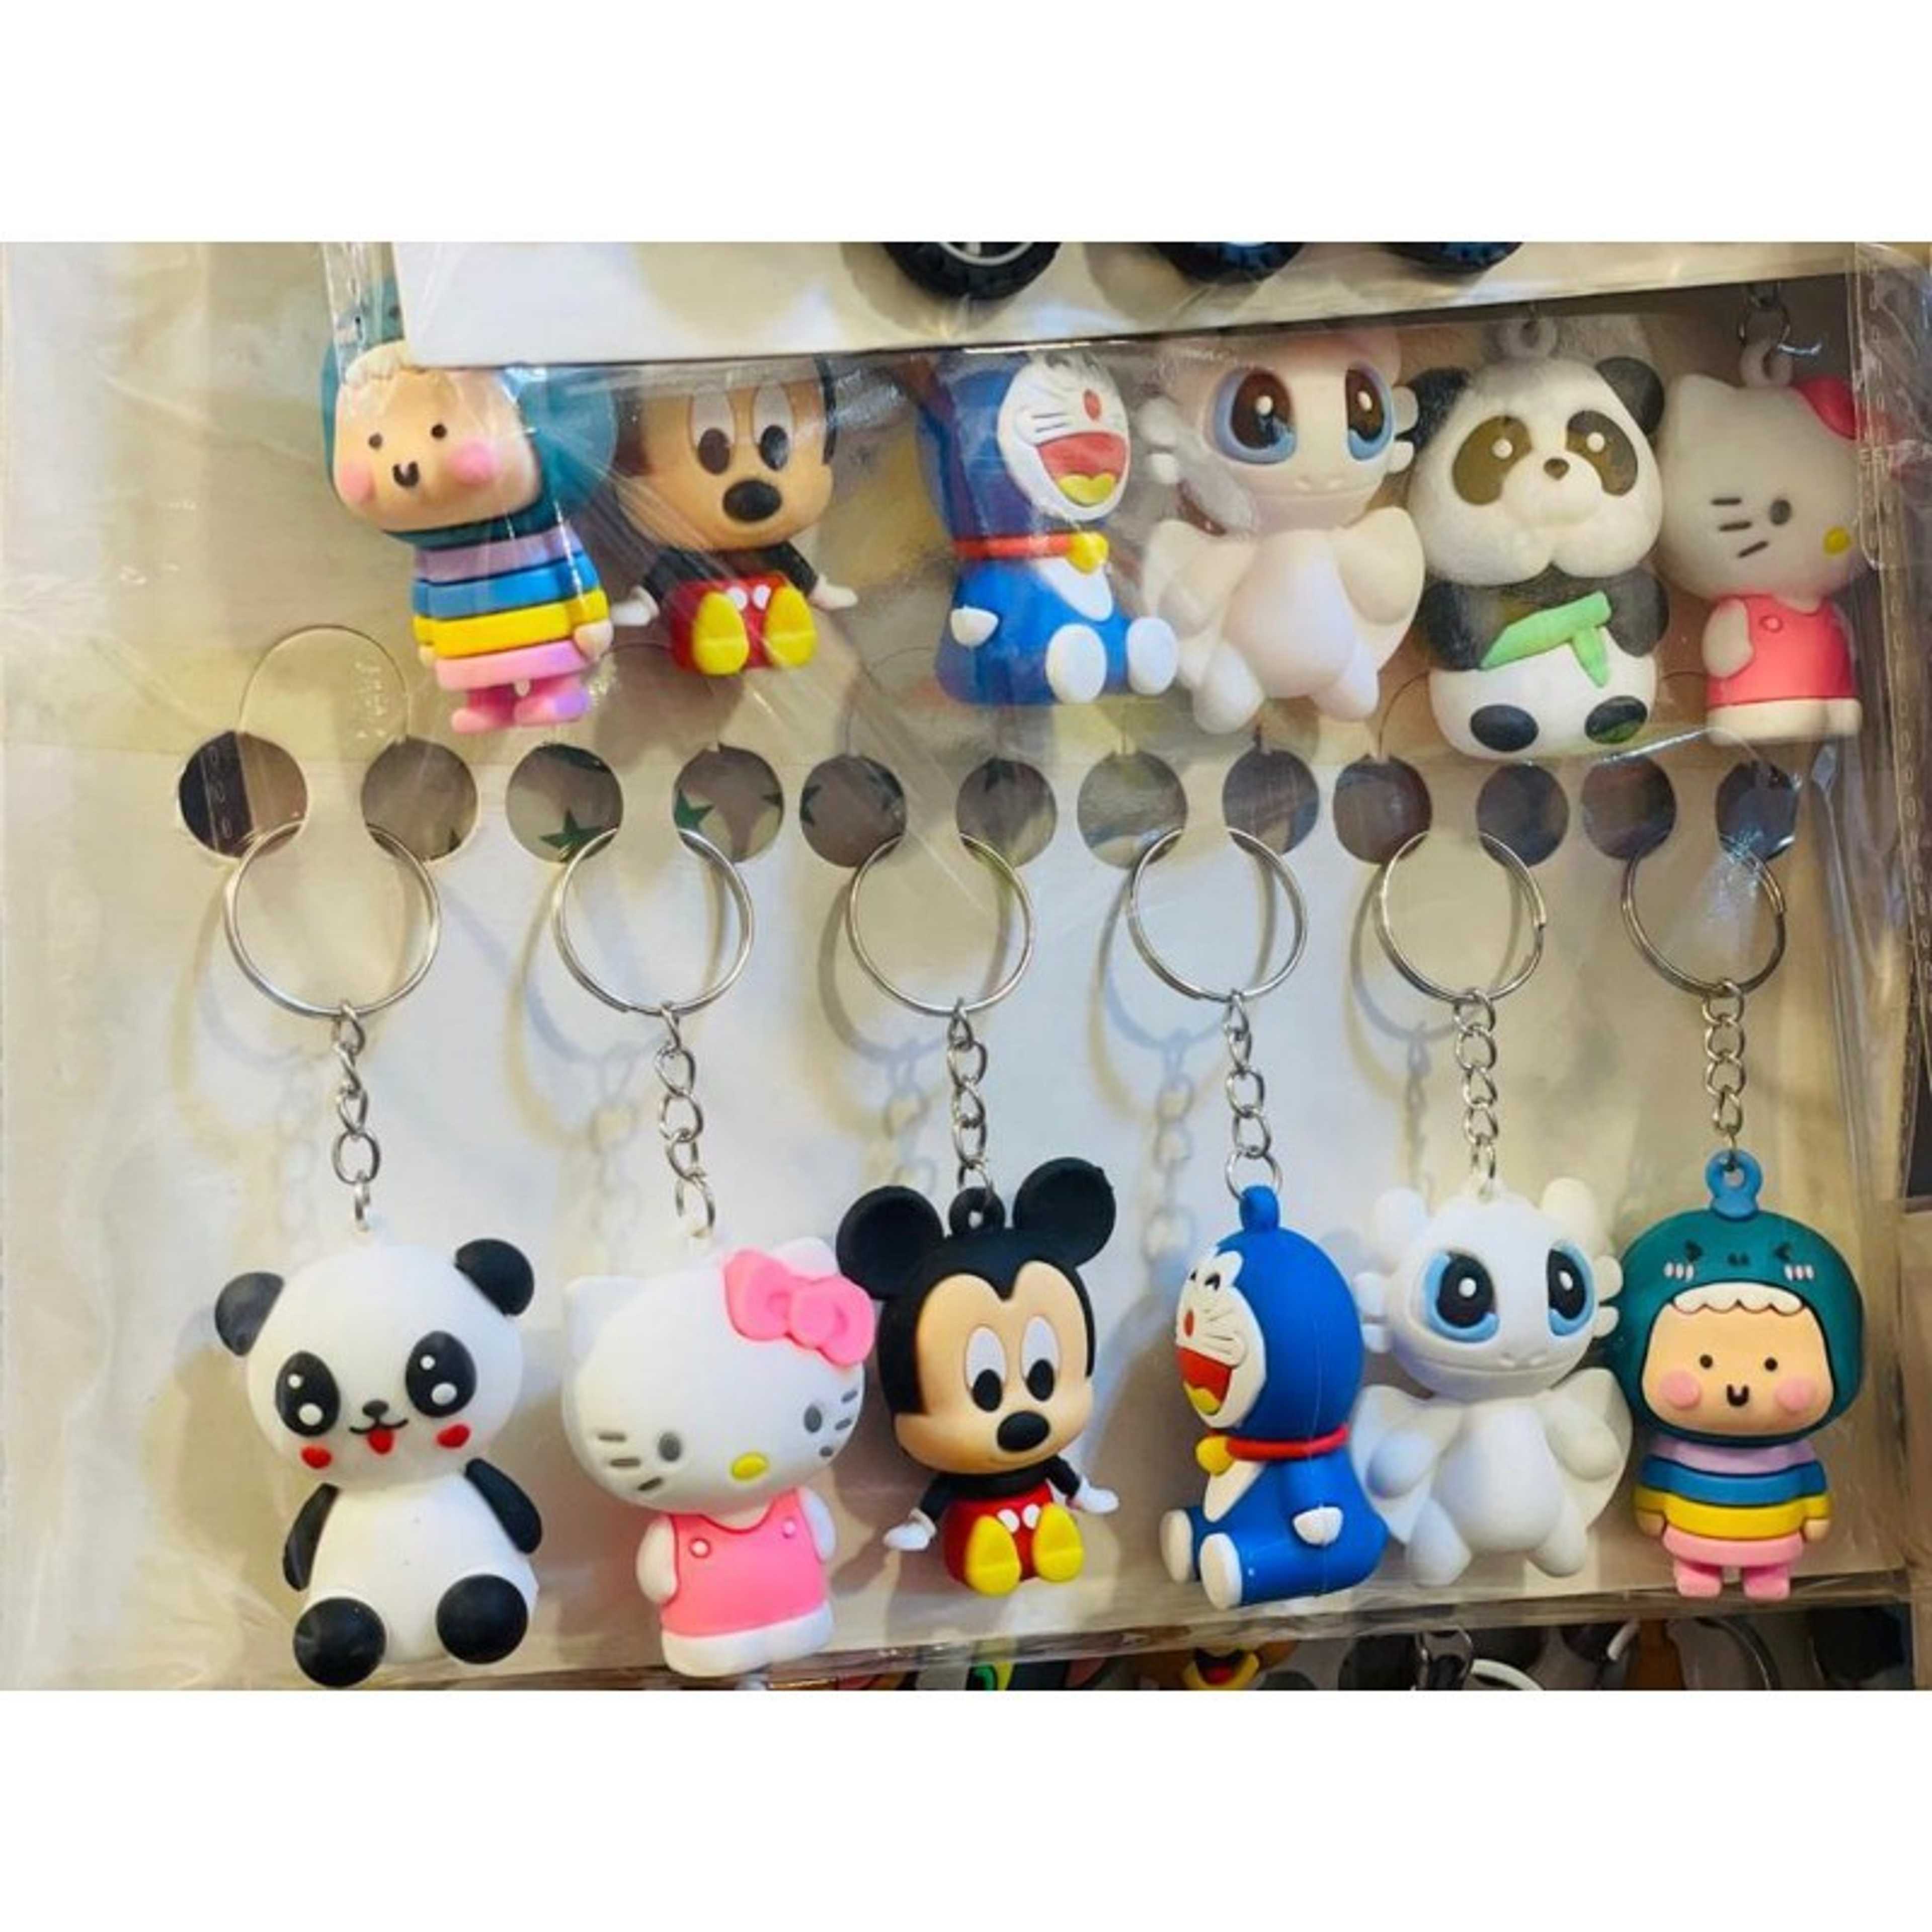 Girls keychain Multi designs me ha (1PCS) For Example Doremon keychain mickey mouse keychain  Panda keychain pokemon keychain kitty Doll keychain